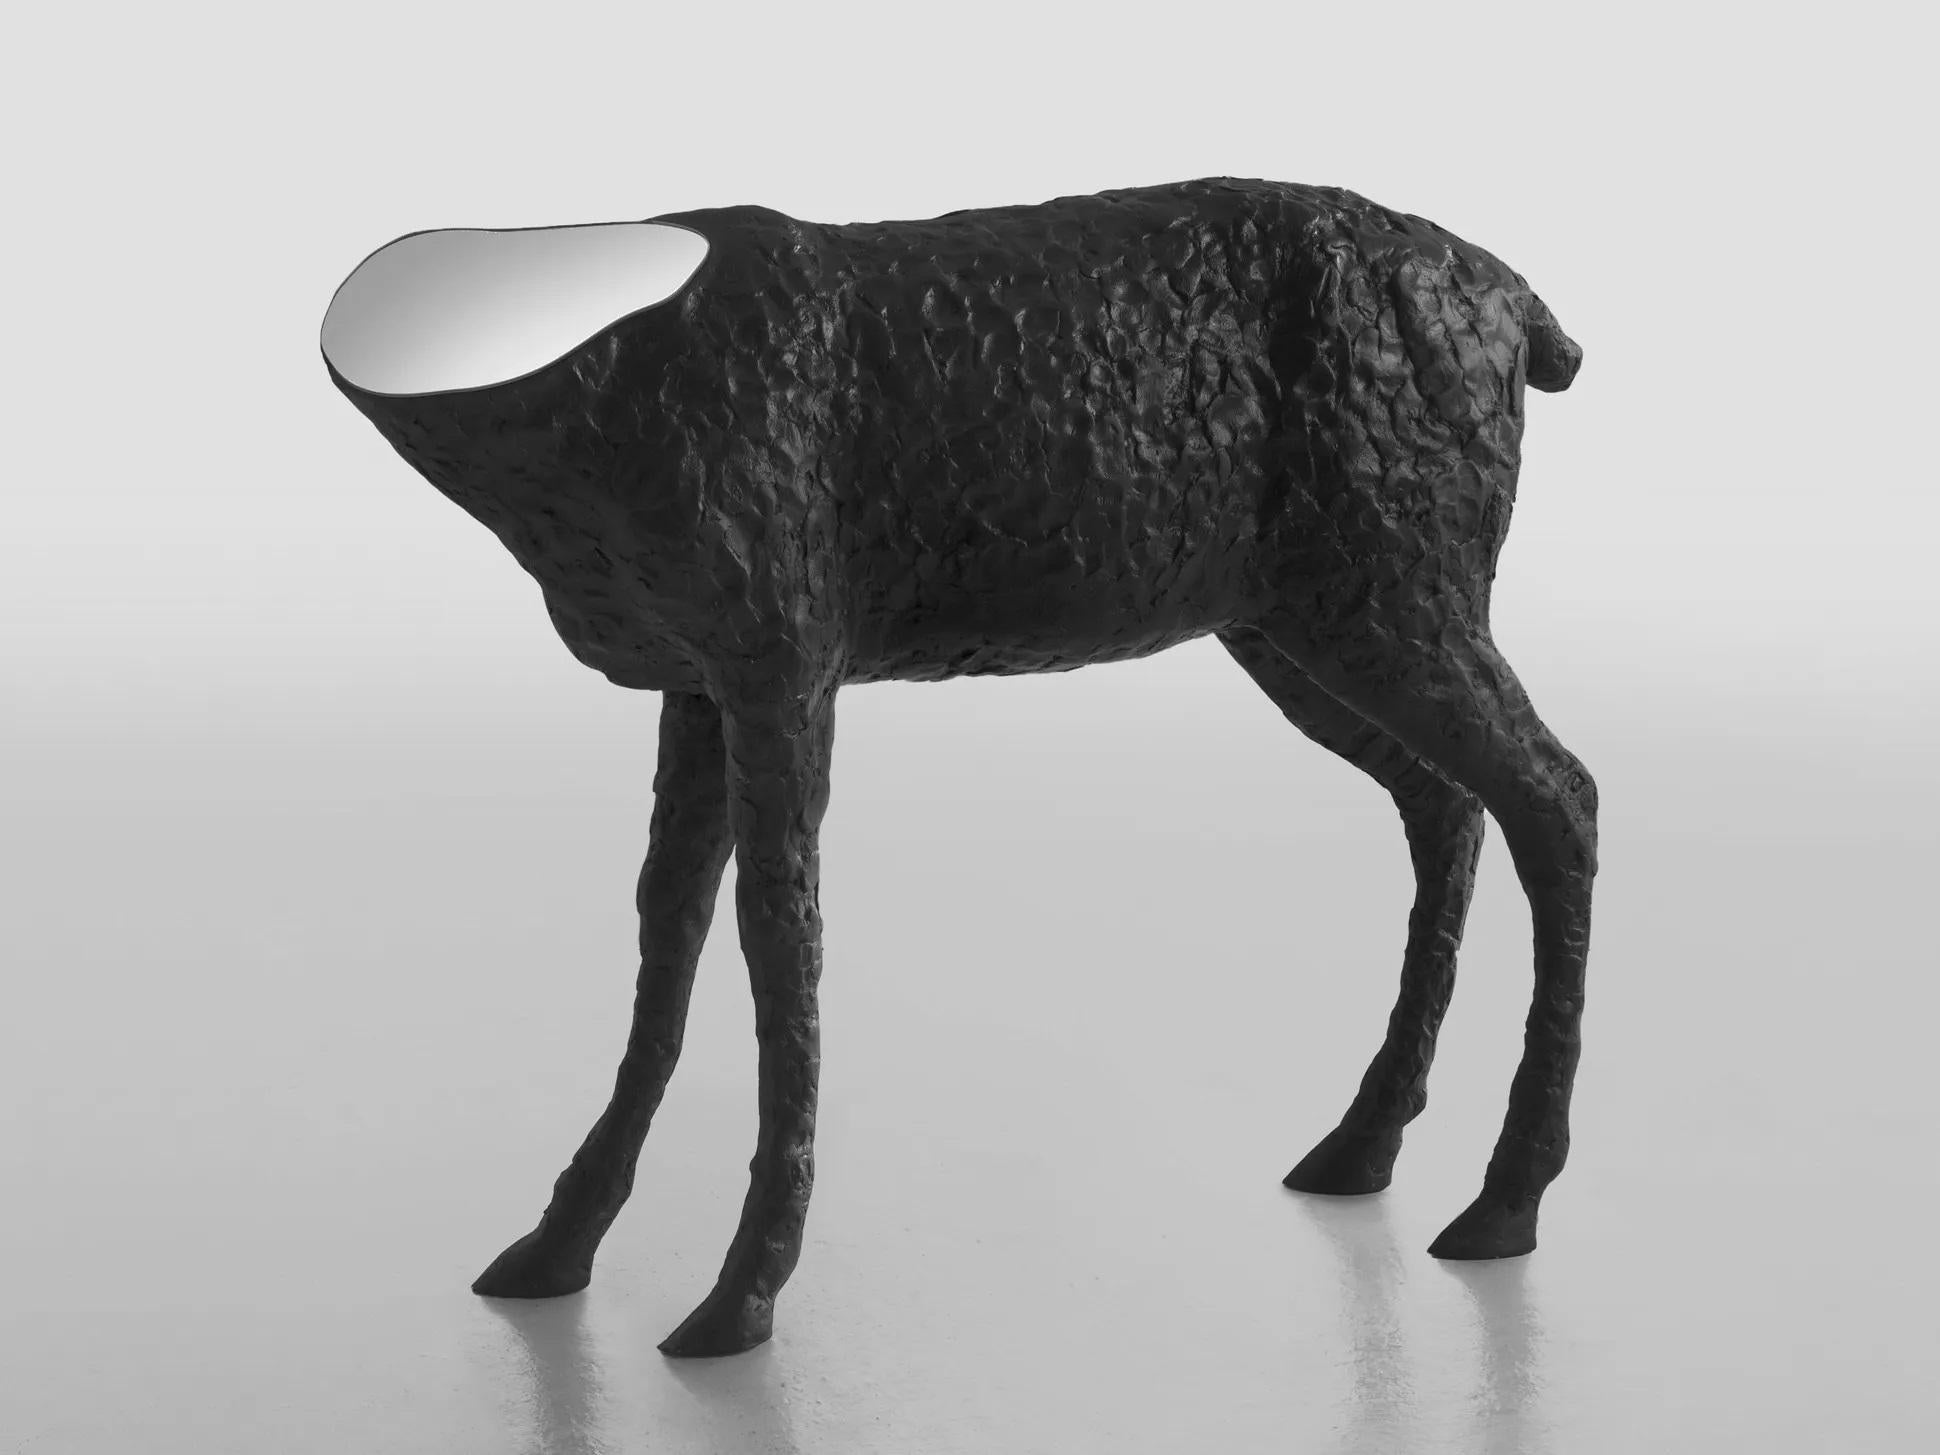 Mirroe sculptured mirror by Imperfettolab
Dimensions: W 110 x D 32 x H 90 cm
Materials: Fiberglass, mirror
Available in 2 colors: black, white.
 
A mirror that seems to come from a dream in which creatures of the animal world and symbolic